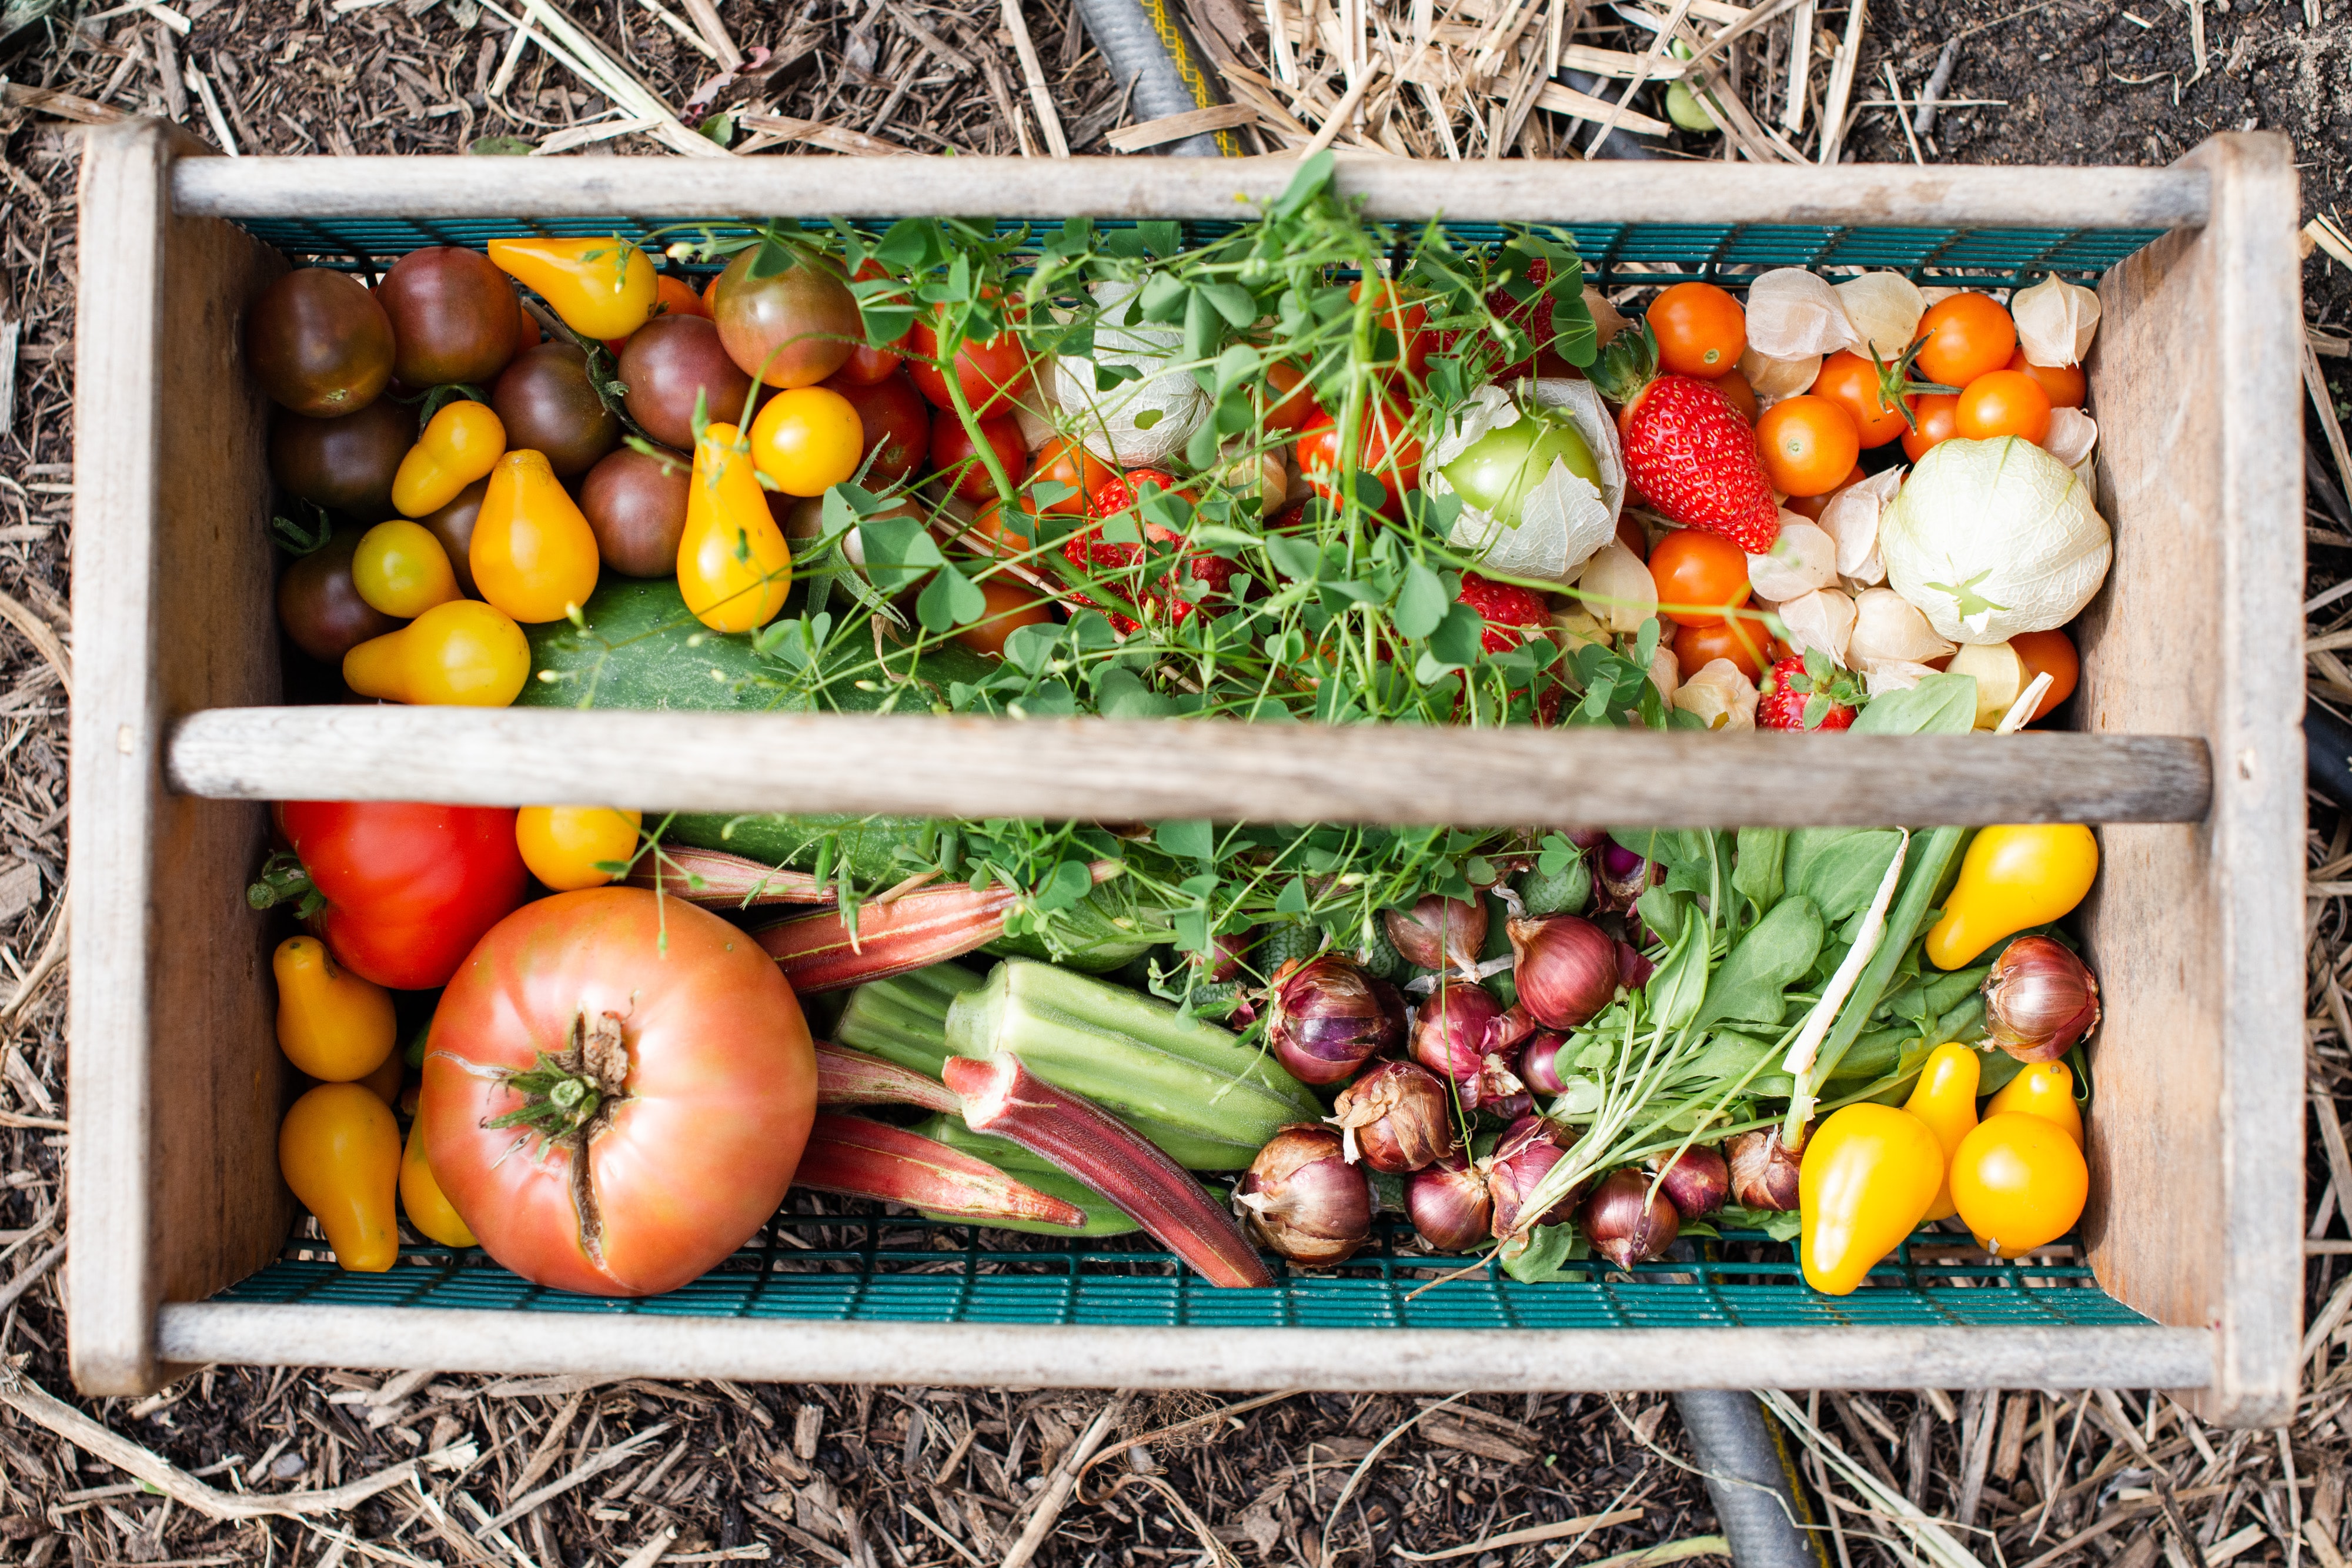 A basket filled with fresh tomatoes, okra, onions, and micro-greens.